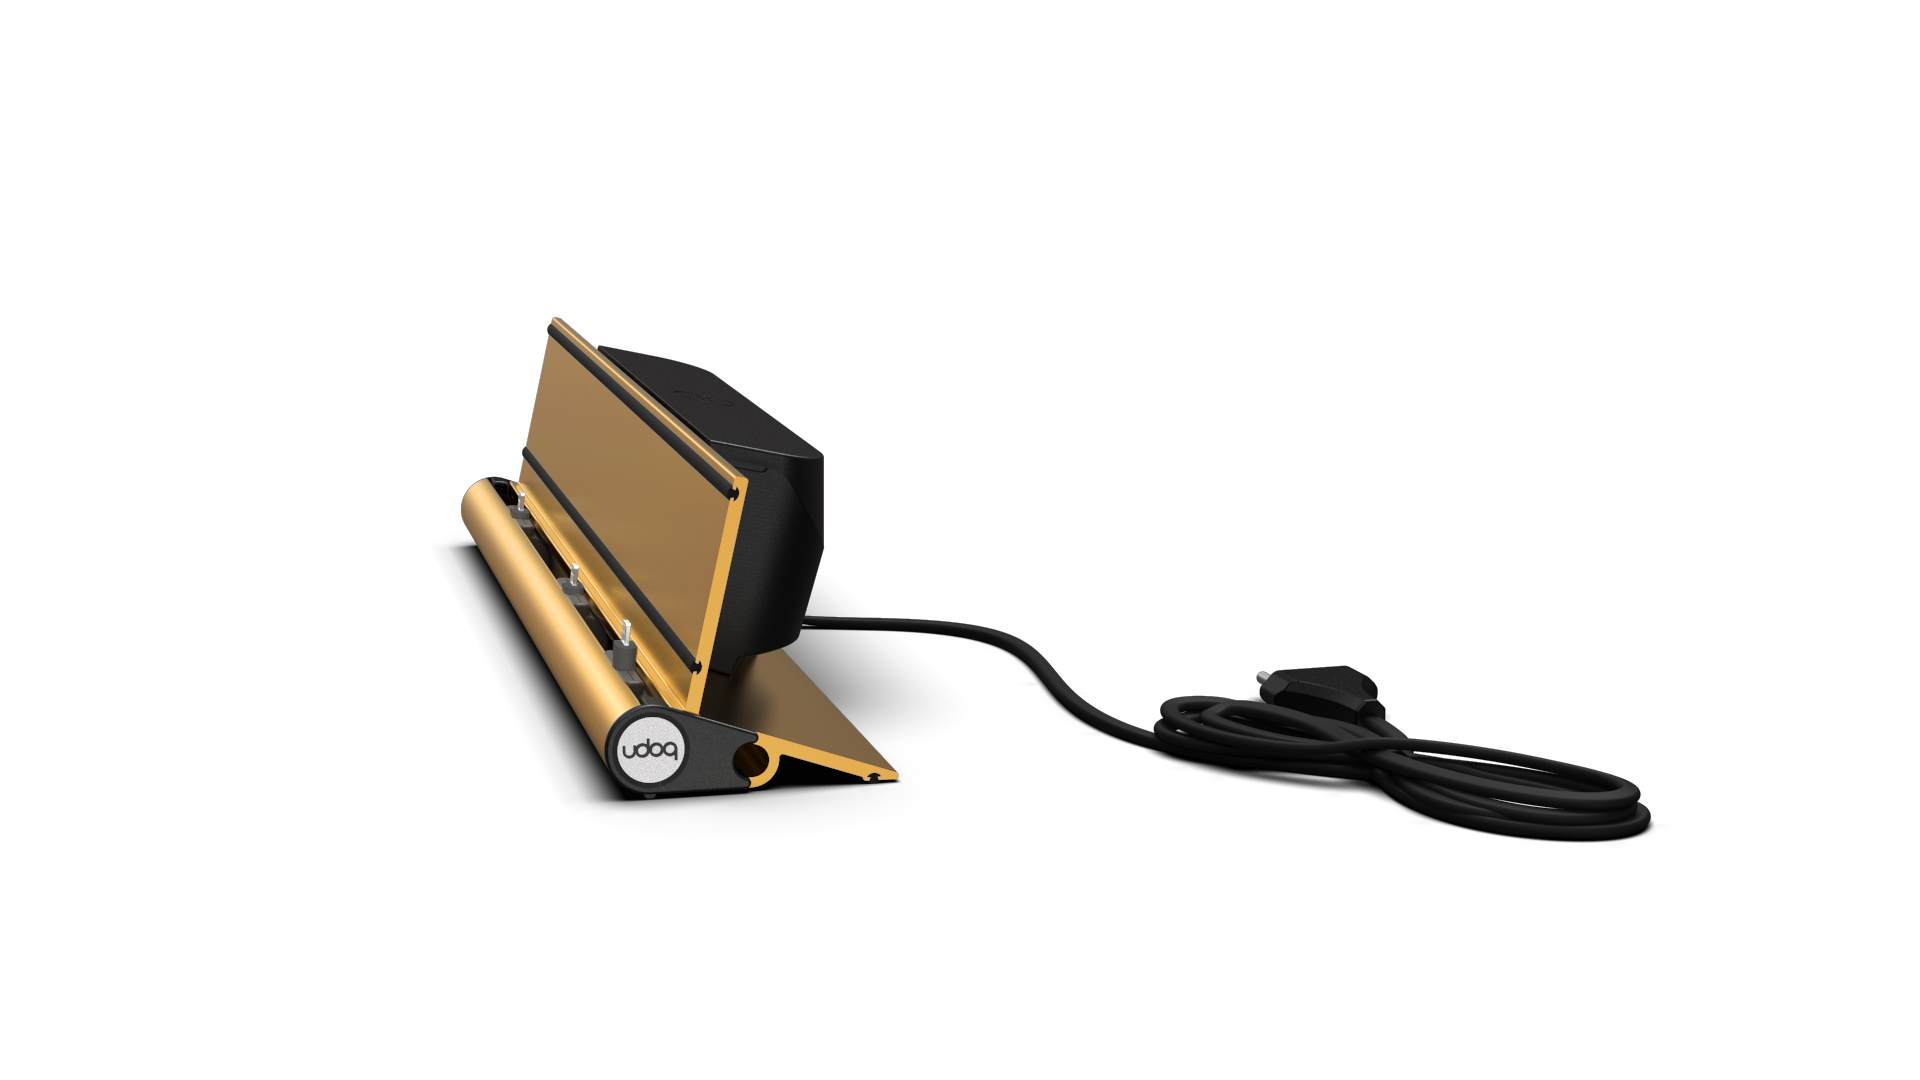 udoq Gold multi-charger with Apple Lightning connectors